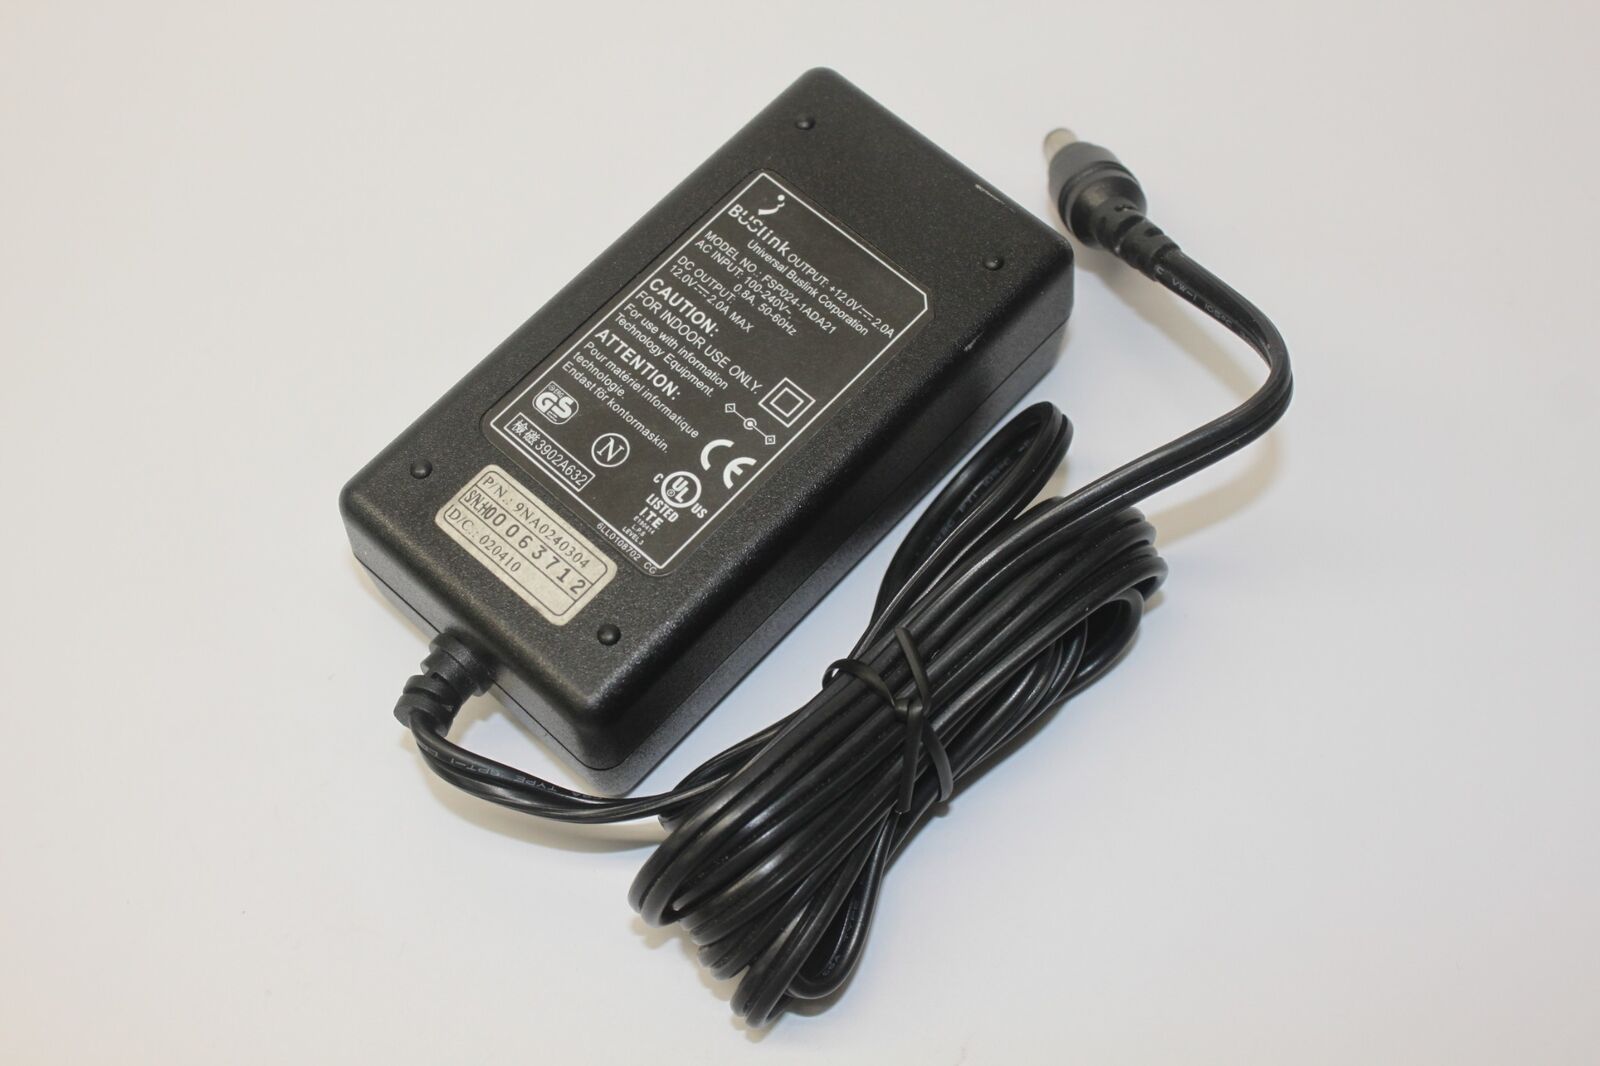 1pcs New AC Adapter Power Charger For EVI-D70P EVI-D100P MPA-AC1 EVI-HD1 1pcs New AC Adapter Power Charger For EVI-D70P